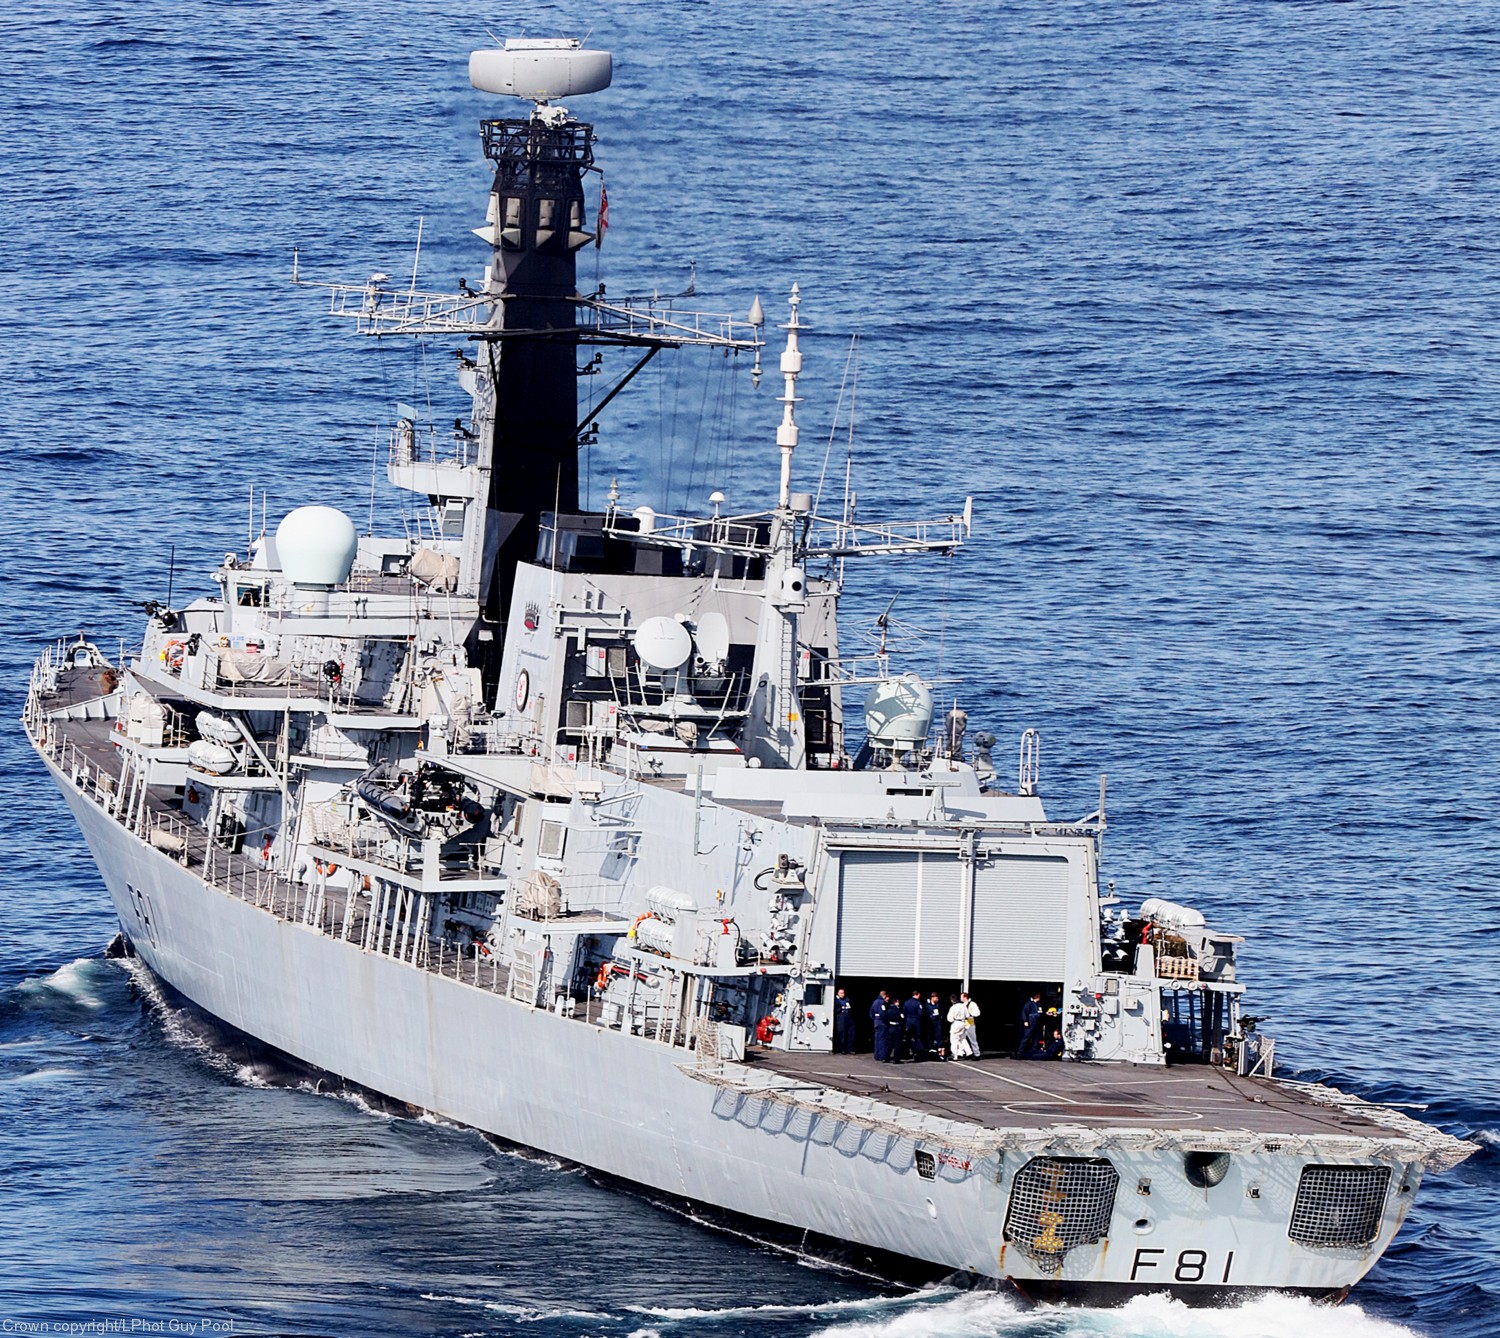 f-81 hms sutherland type 23 duke class guided missile frigate ffg royal navy 35